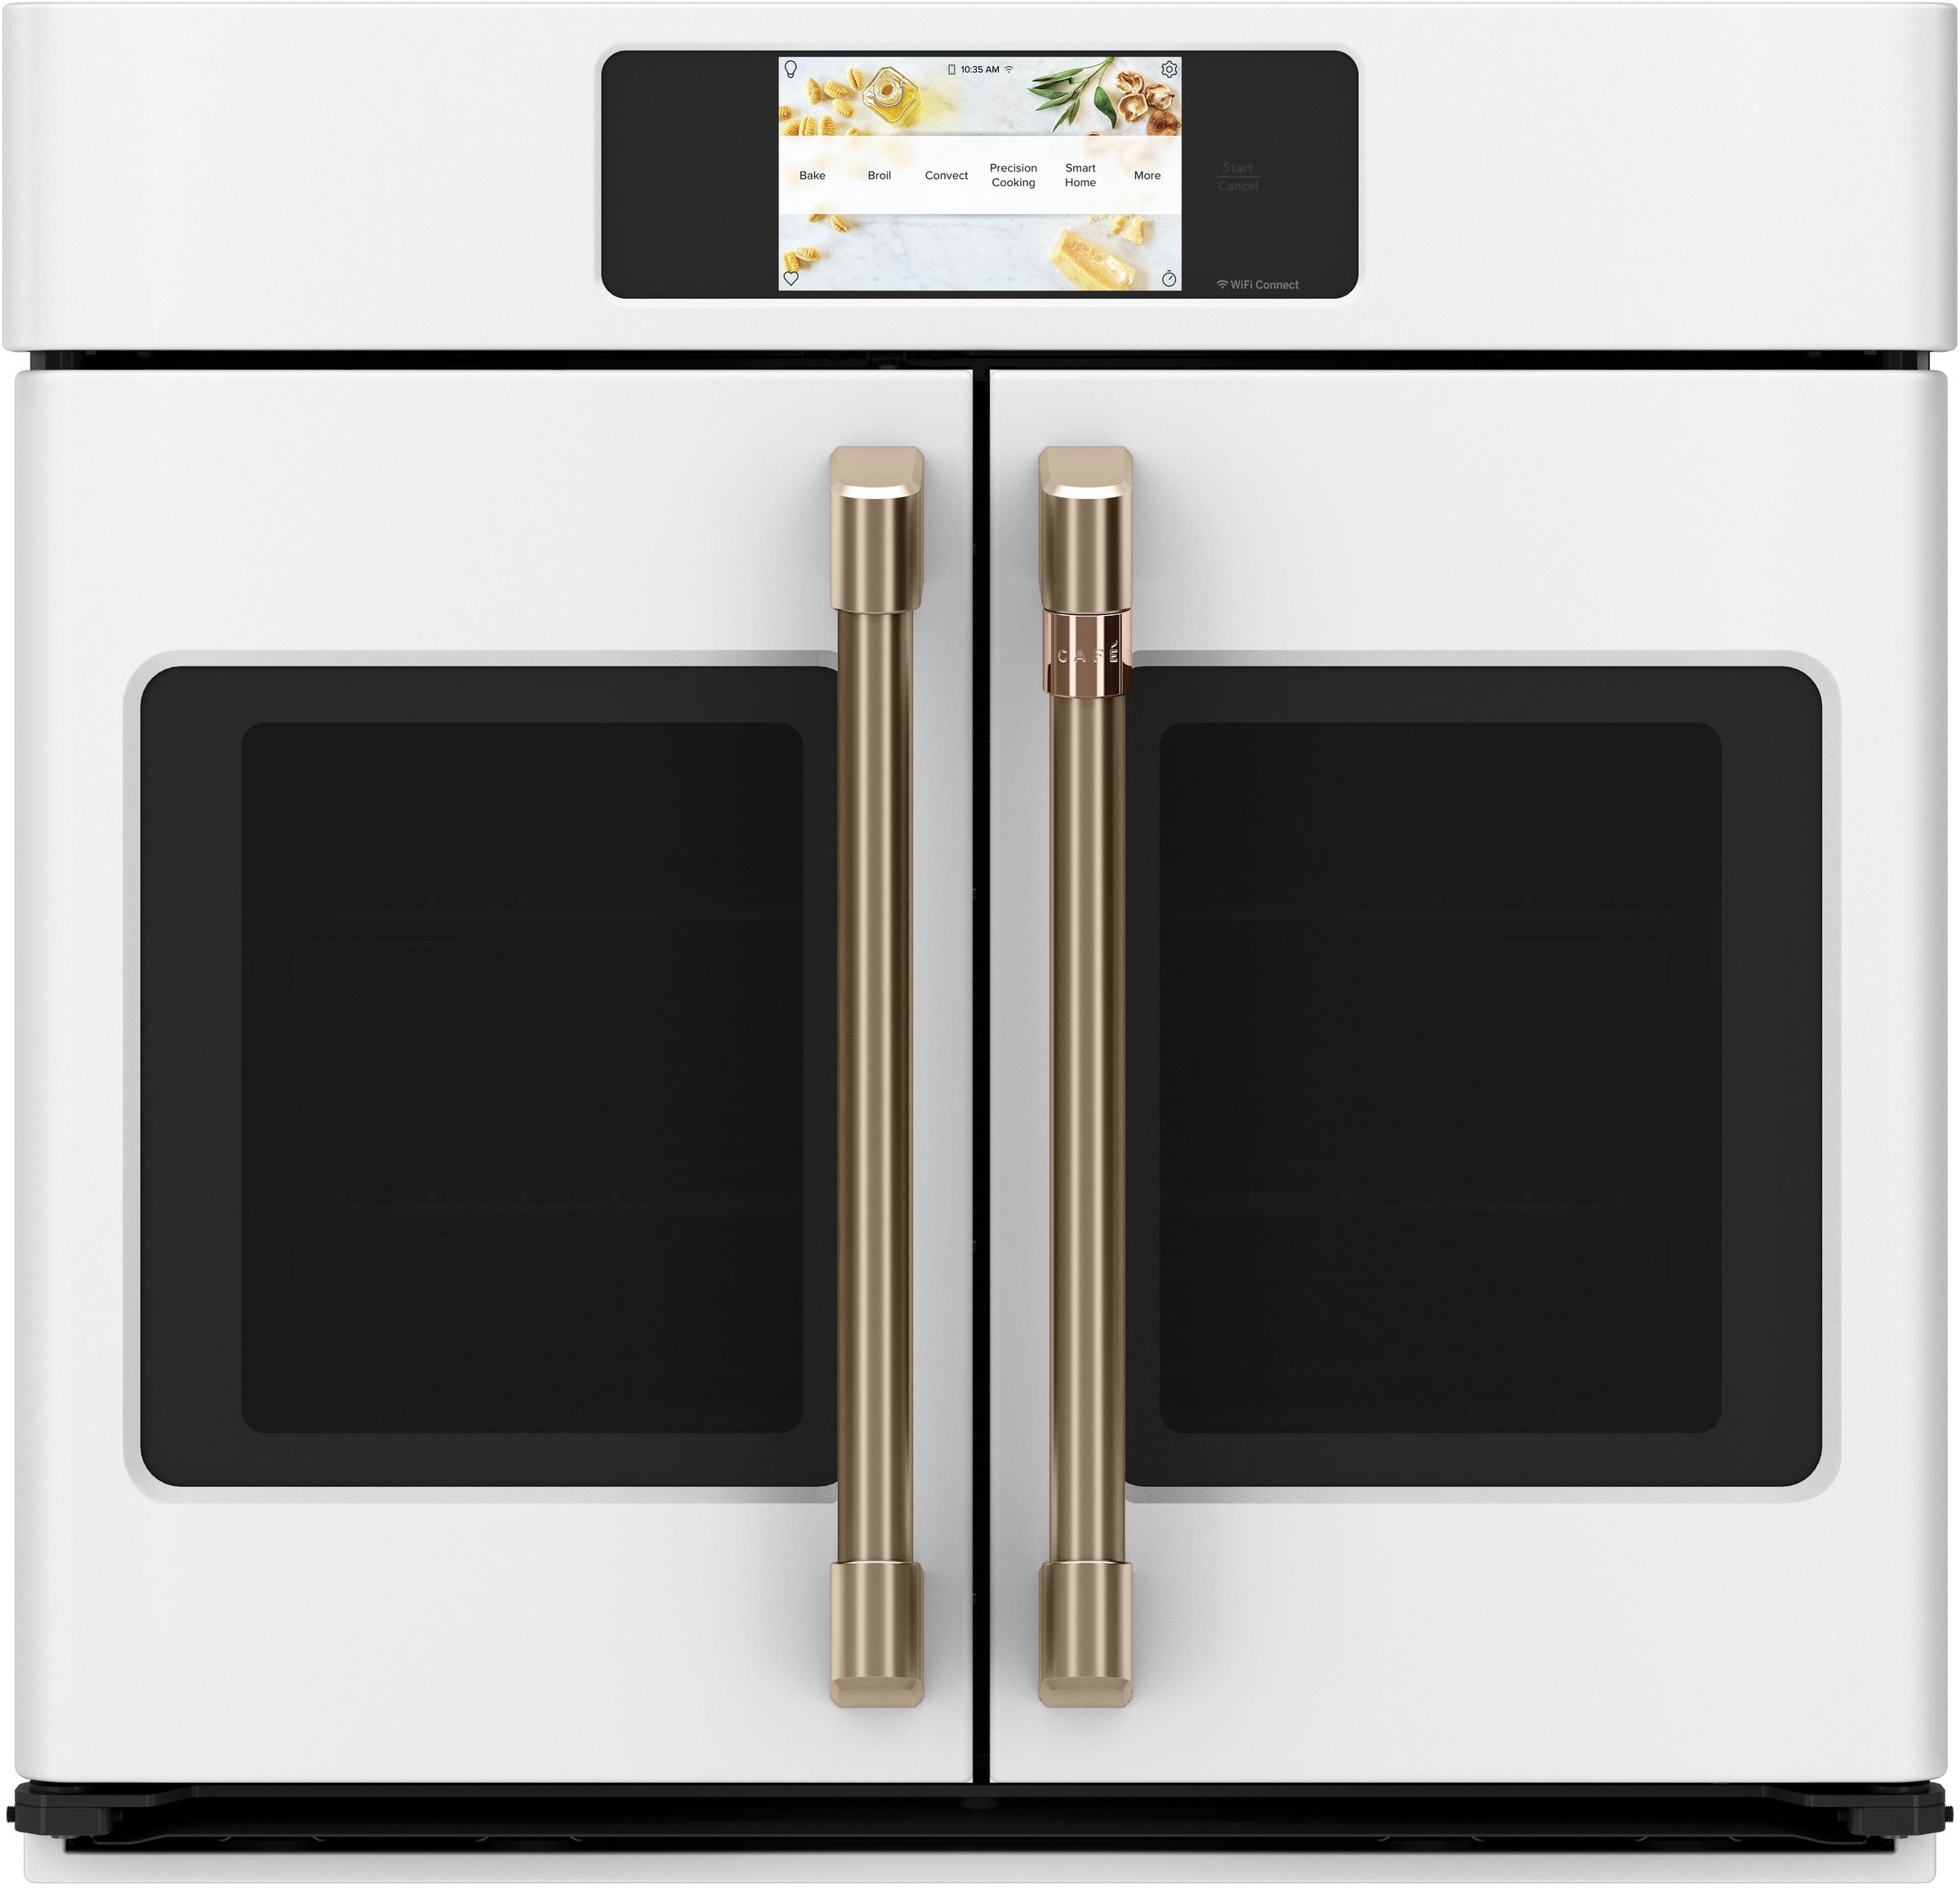 Café™ Professional Series 30" Matte White Smart Built In Convection French Door Single Wall Oven